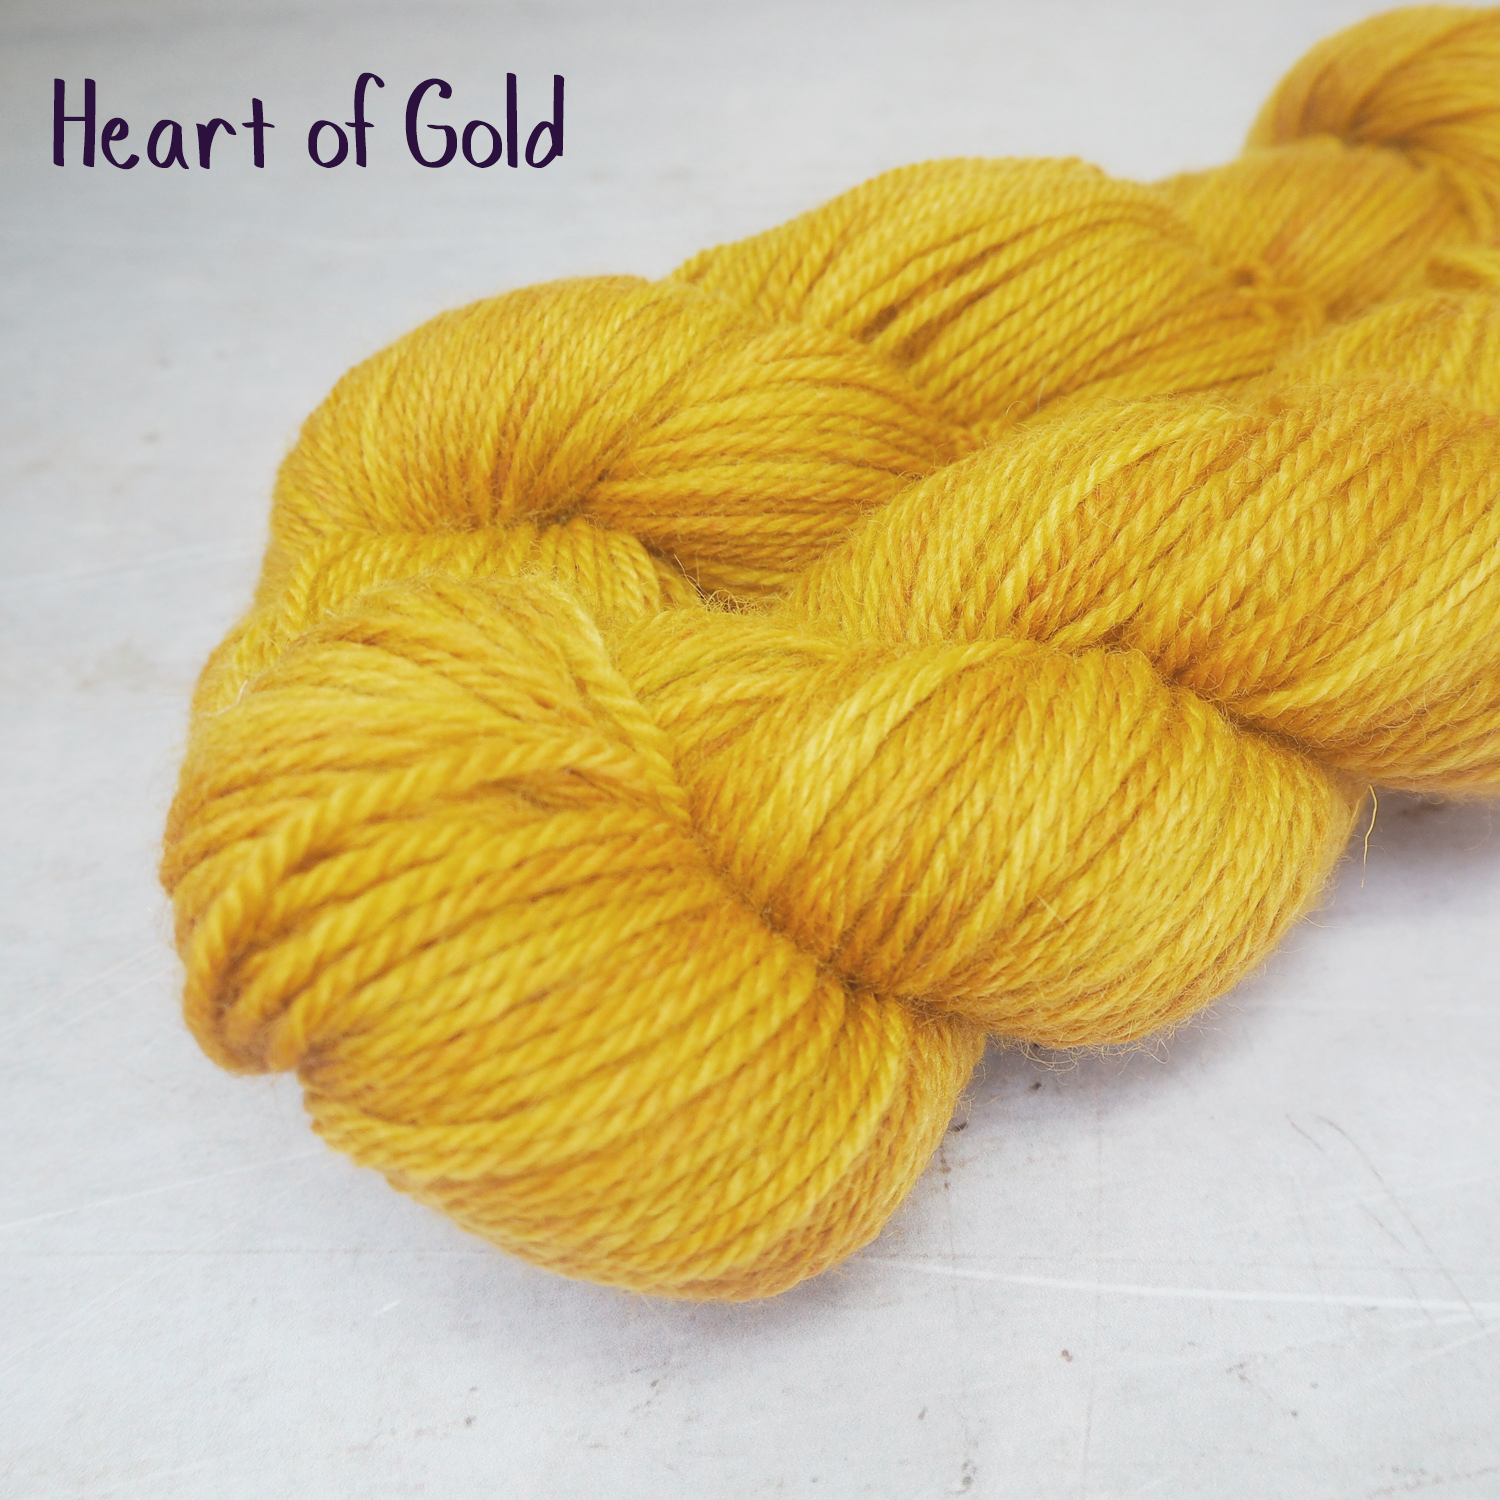 Two skeins of soft, DK-weight yarn, hand-dyed a rich golden yellow. 